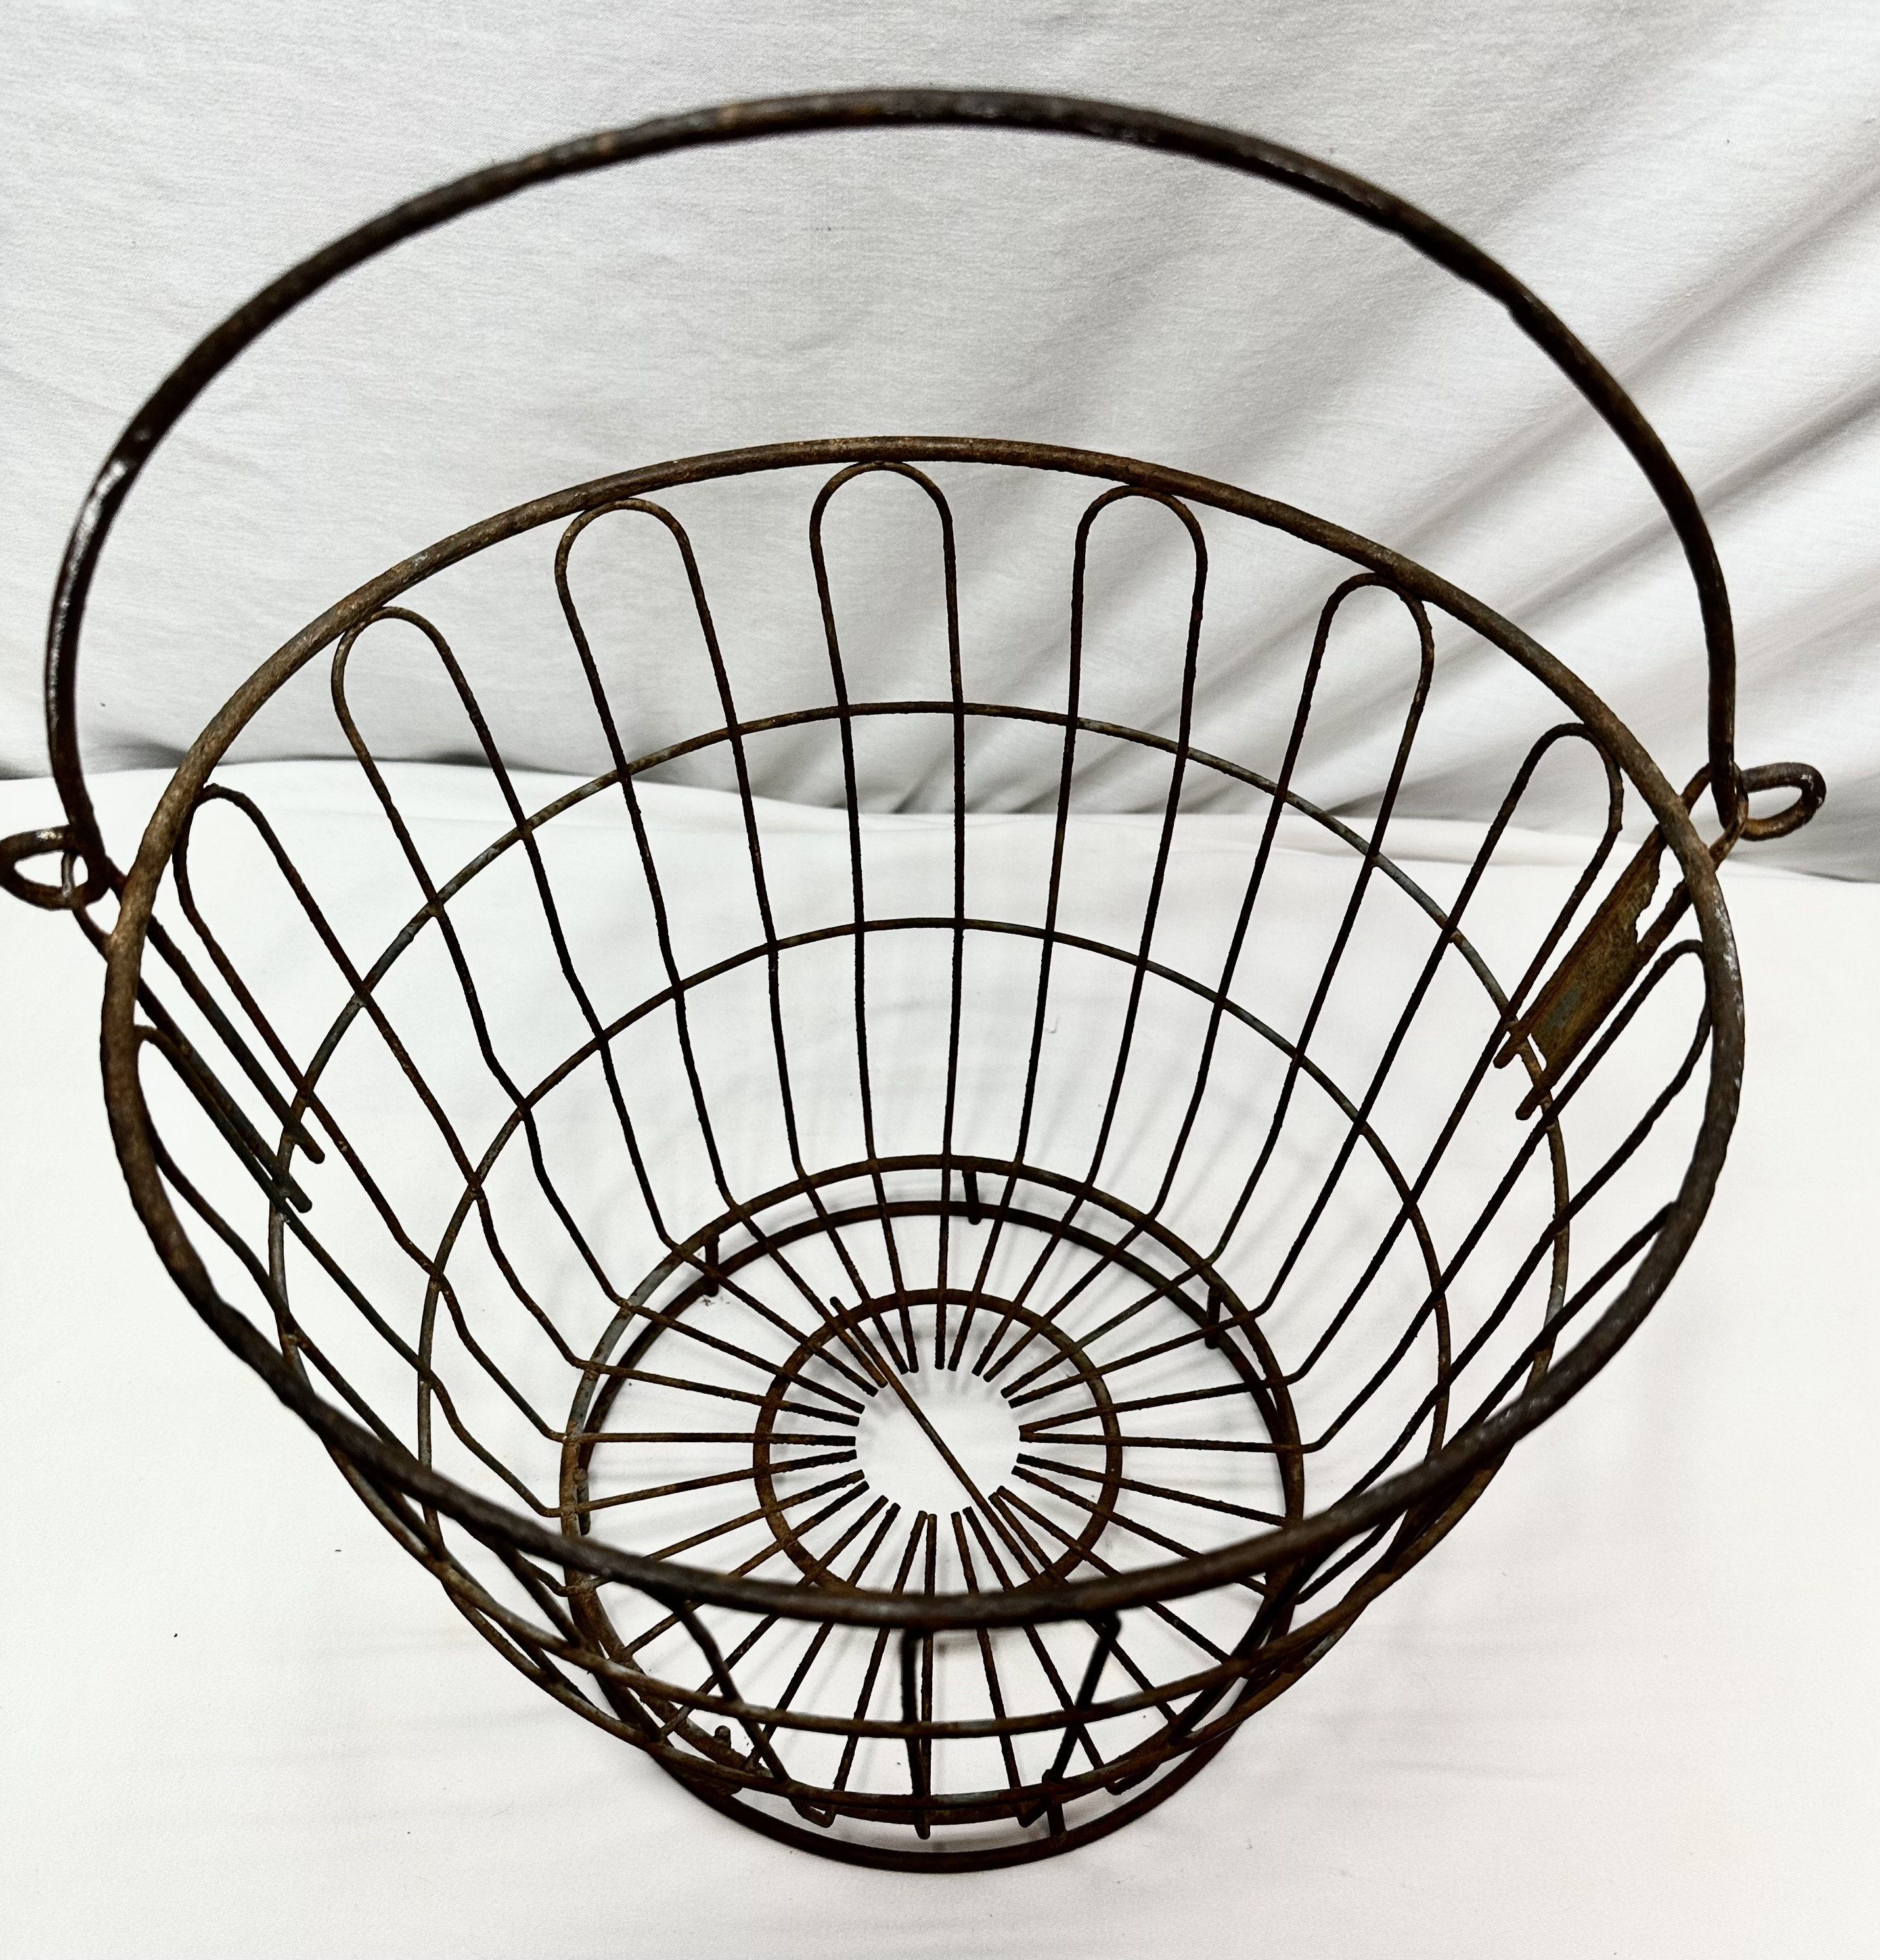 LINCOUNTRY Egg Basket for Gathering Fresh Eggs,Egg Baskets for Fresh Egg  Farmhouse,Egg Collecting Basket,Round Metal Wire Egg Basket With